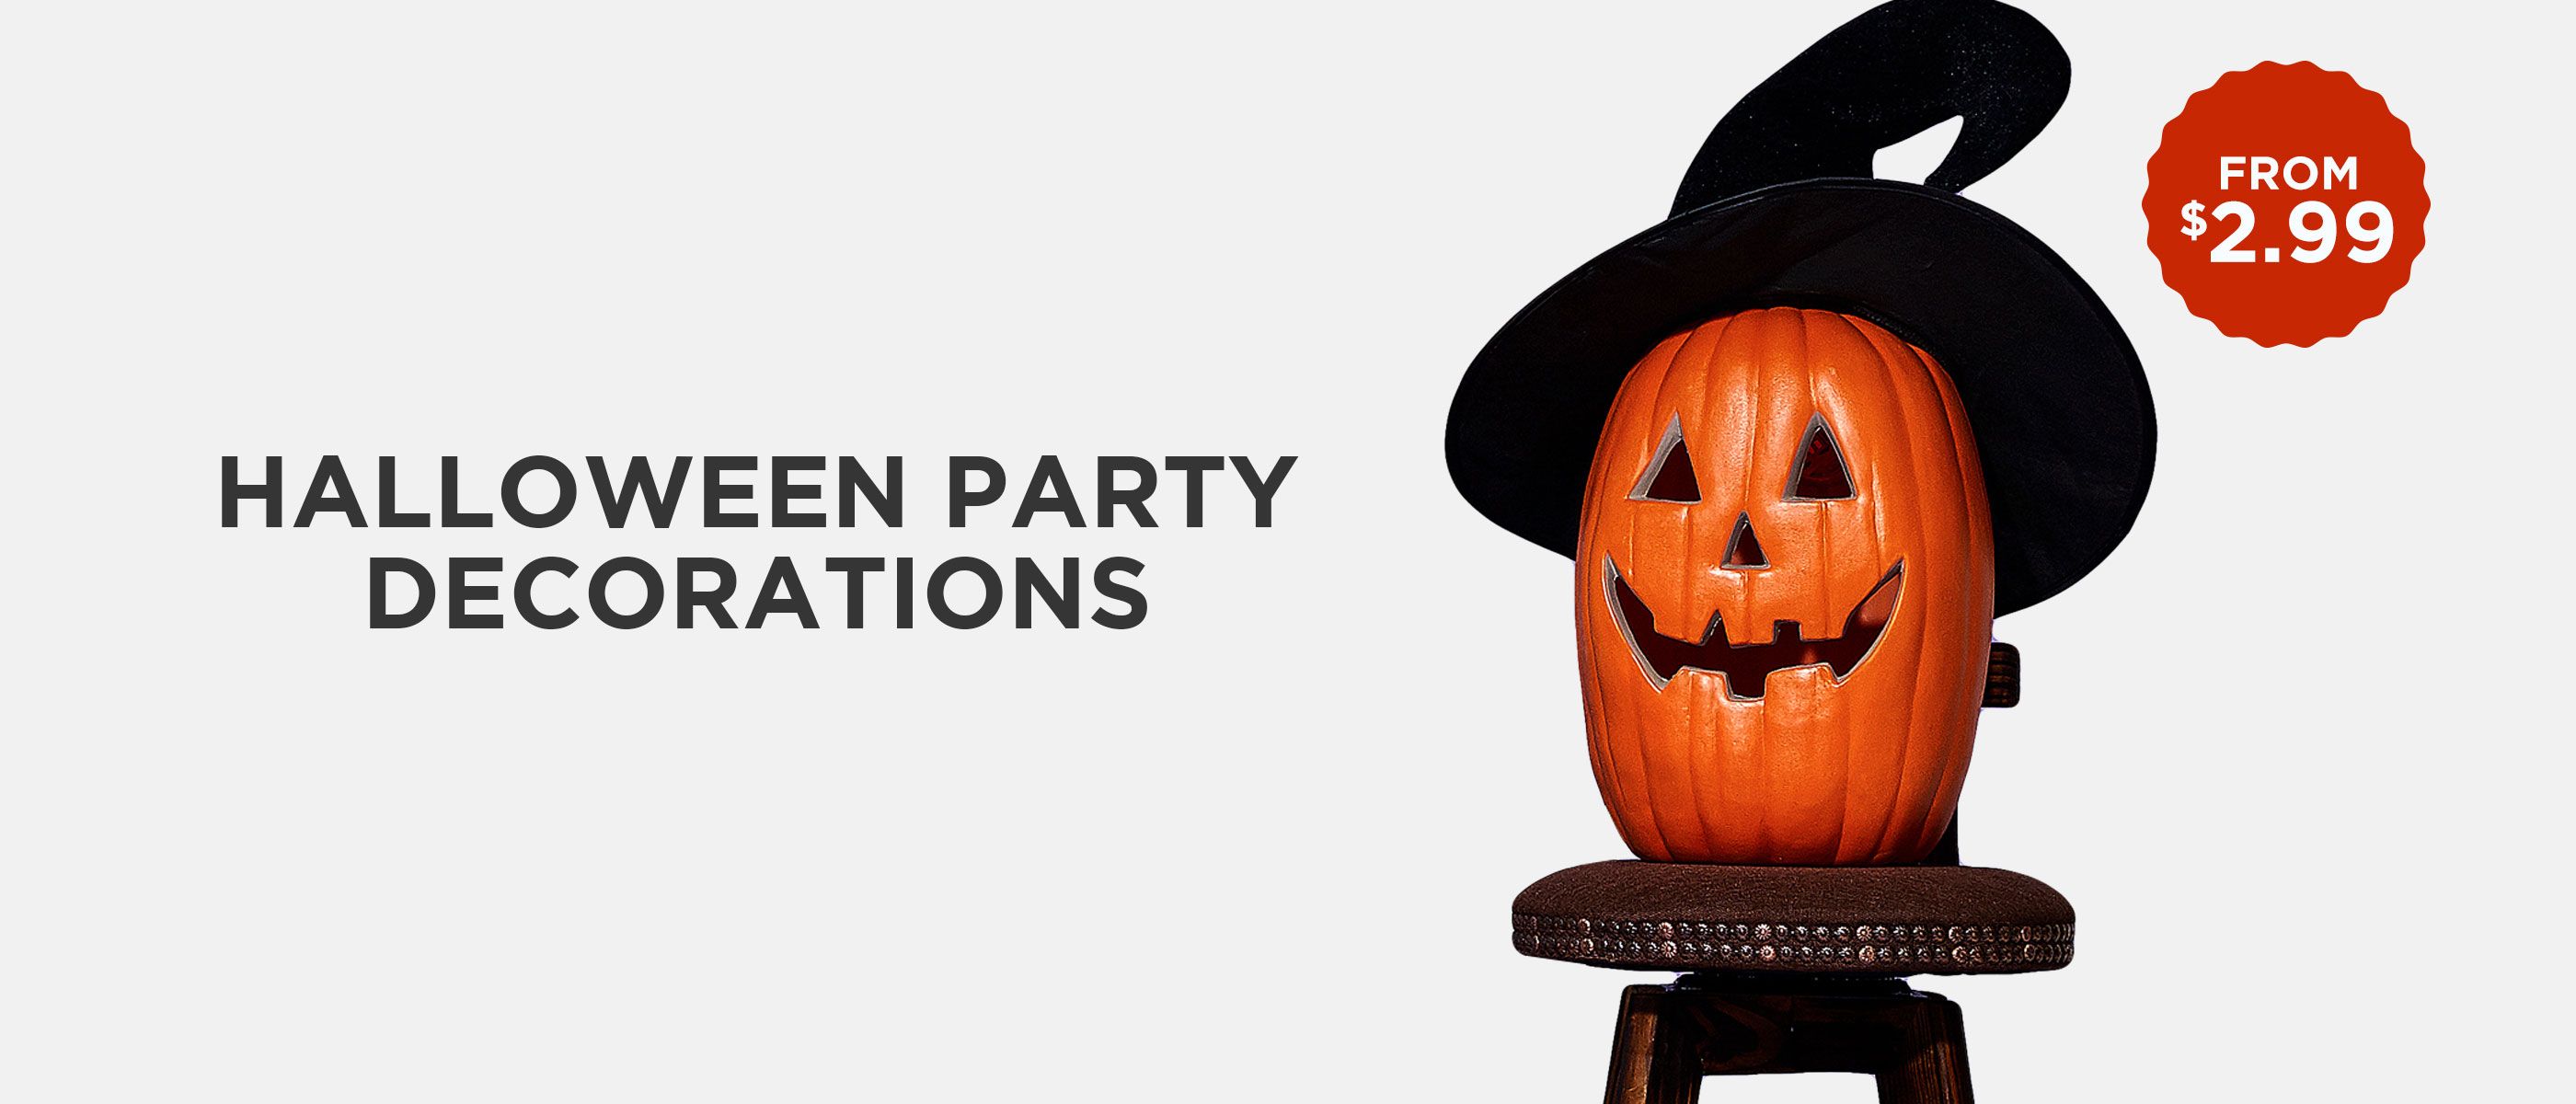 Halloween Party Decorations8.8